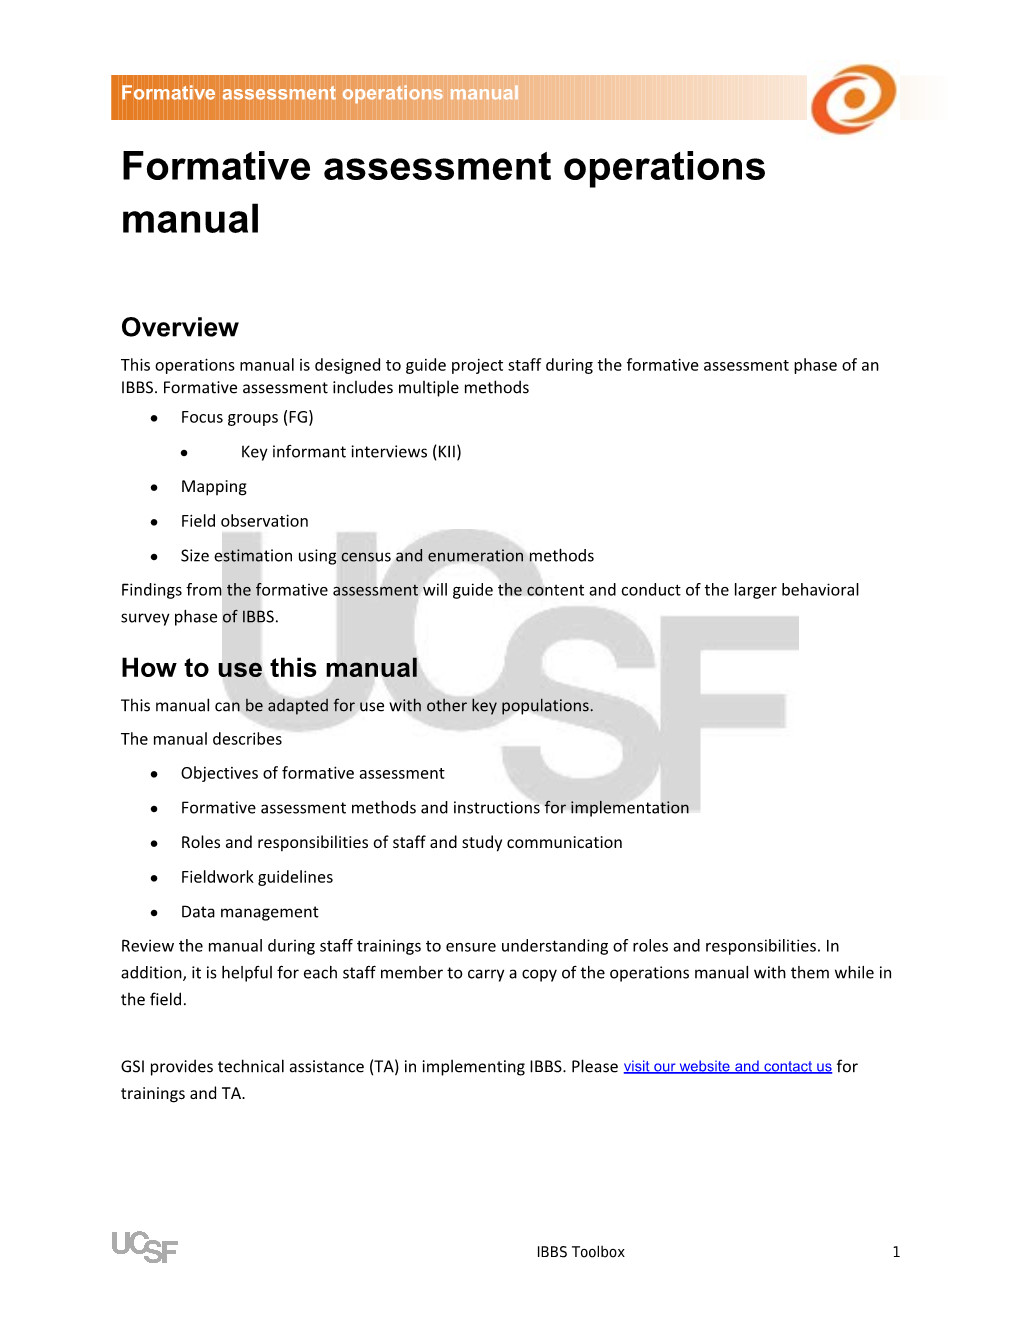 Formative Assessment Operations Manual